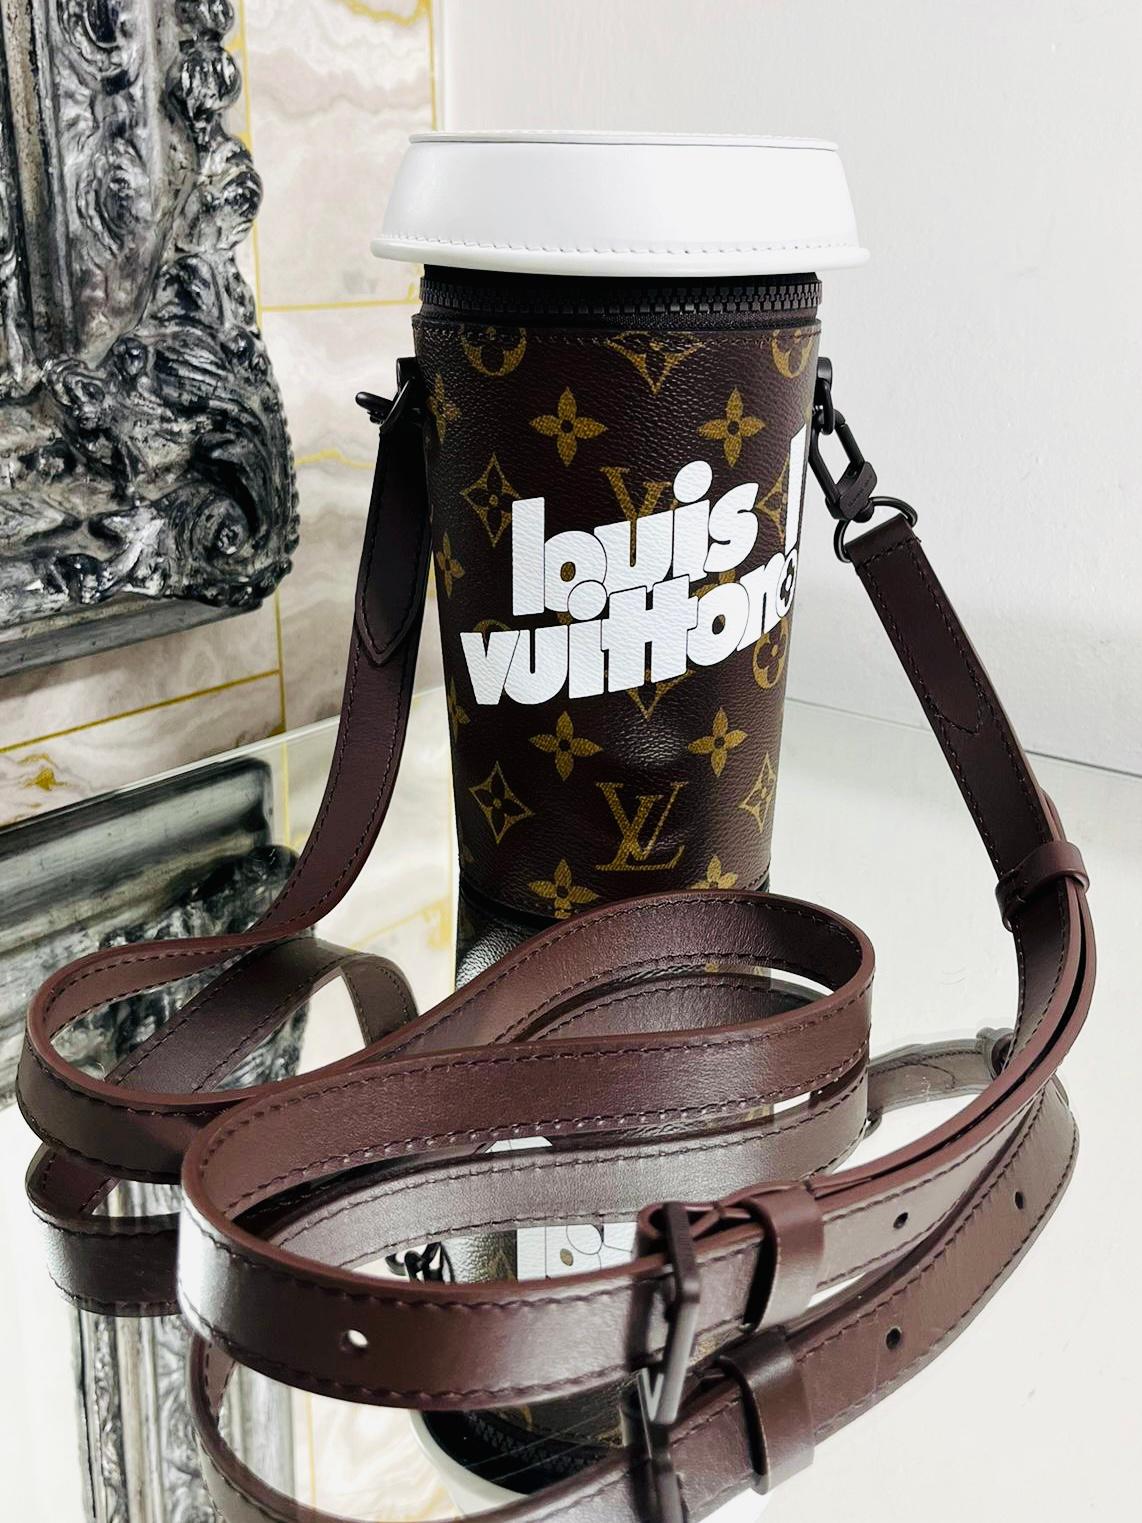 Louis Vuitton Crossbody 'LV' Monogram Coffee Cup Bag By Virgil Abloh

From 2021 collection is the coffee cup bag in all over monogram and a white leather

lid with zipper closure. White pop art style print in over-sized  lettering 'Louis Vuitton'